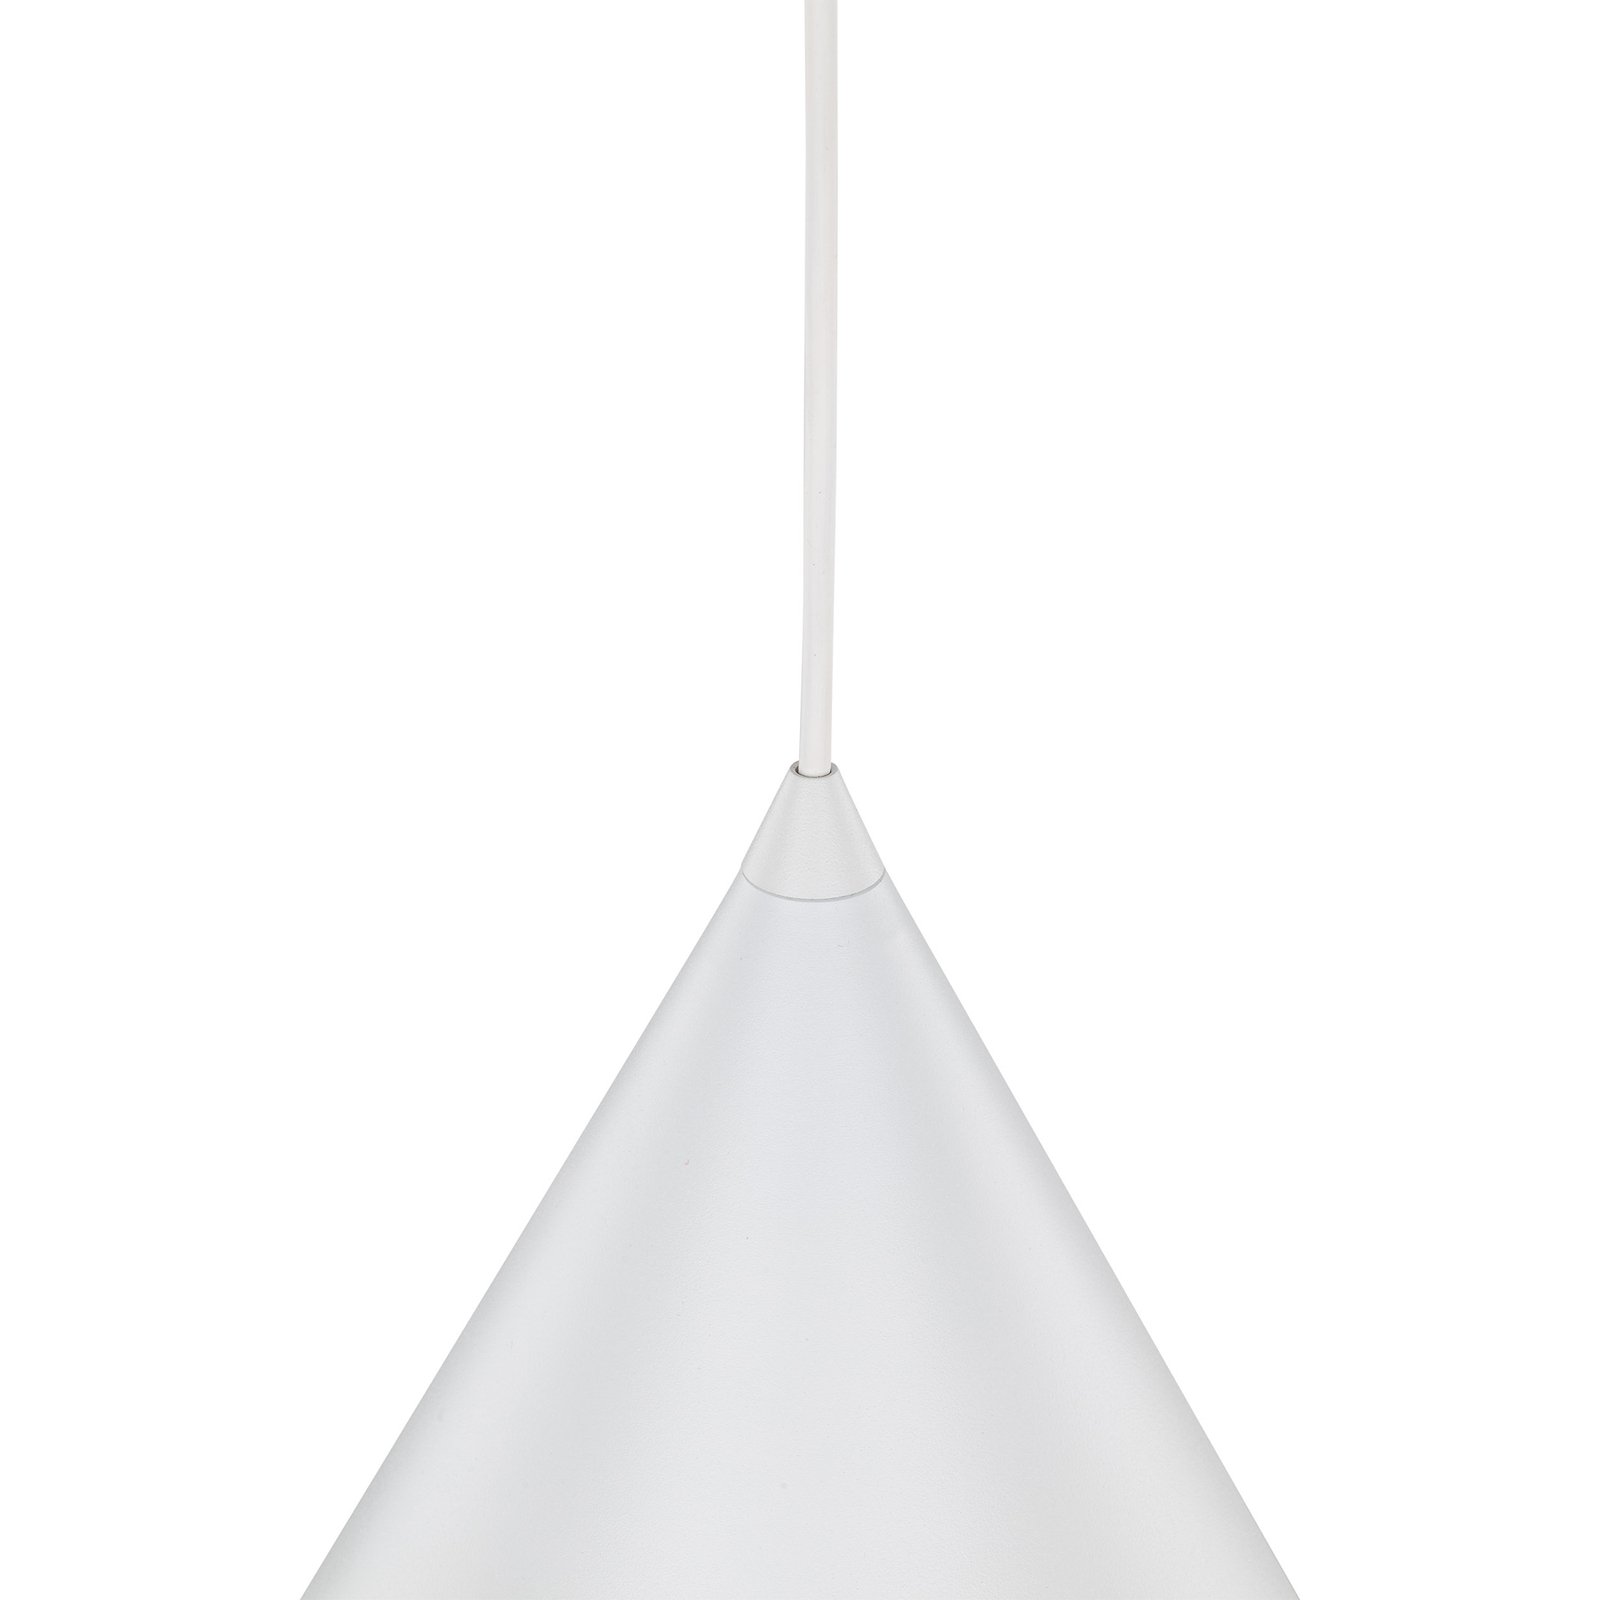 Cono hanglamp, wit, Ø 25 cm, staal, 1-lamp